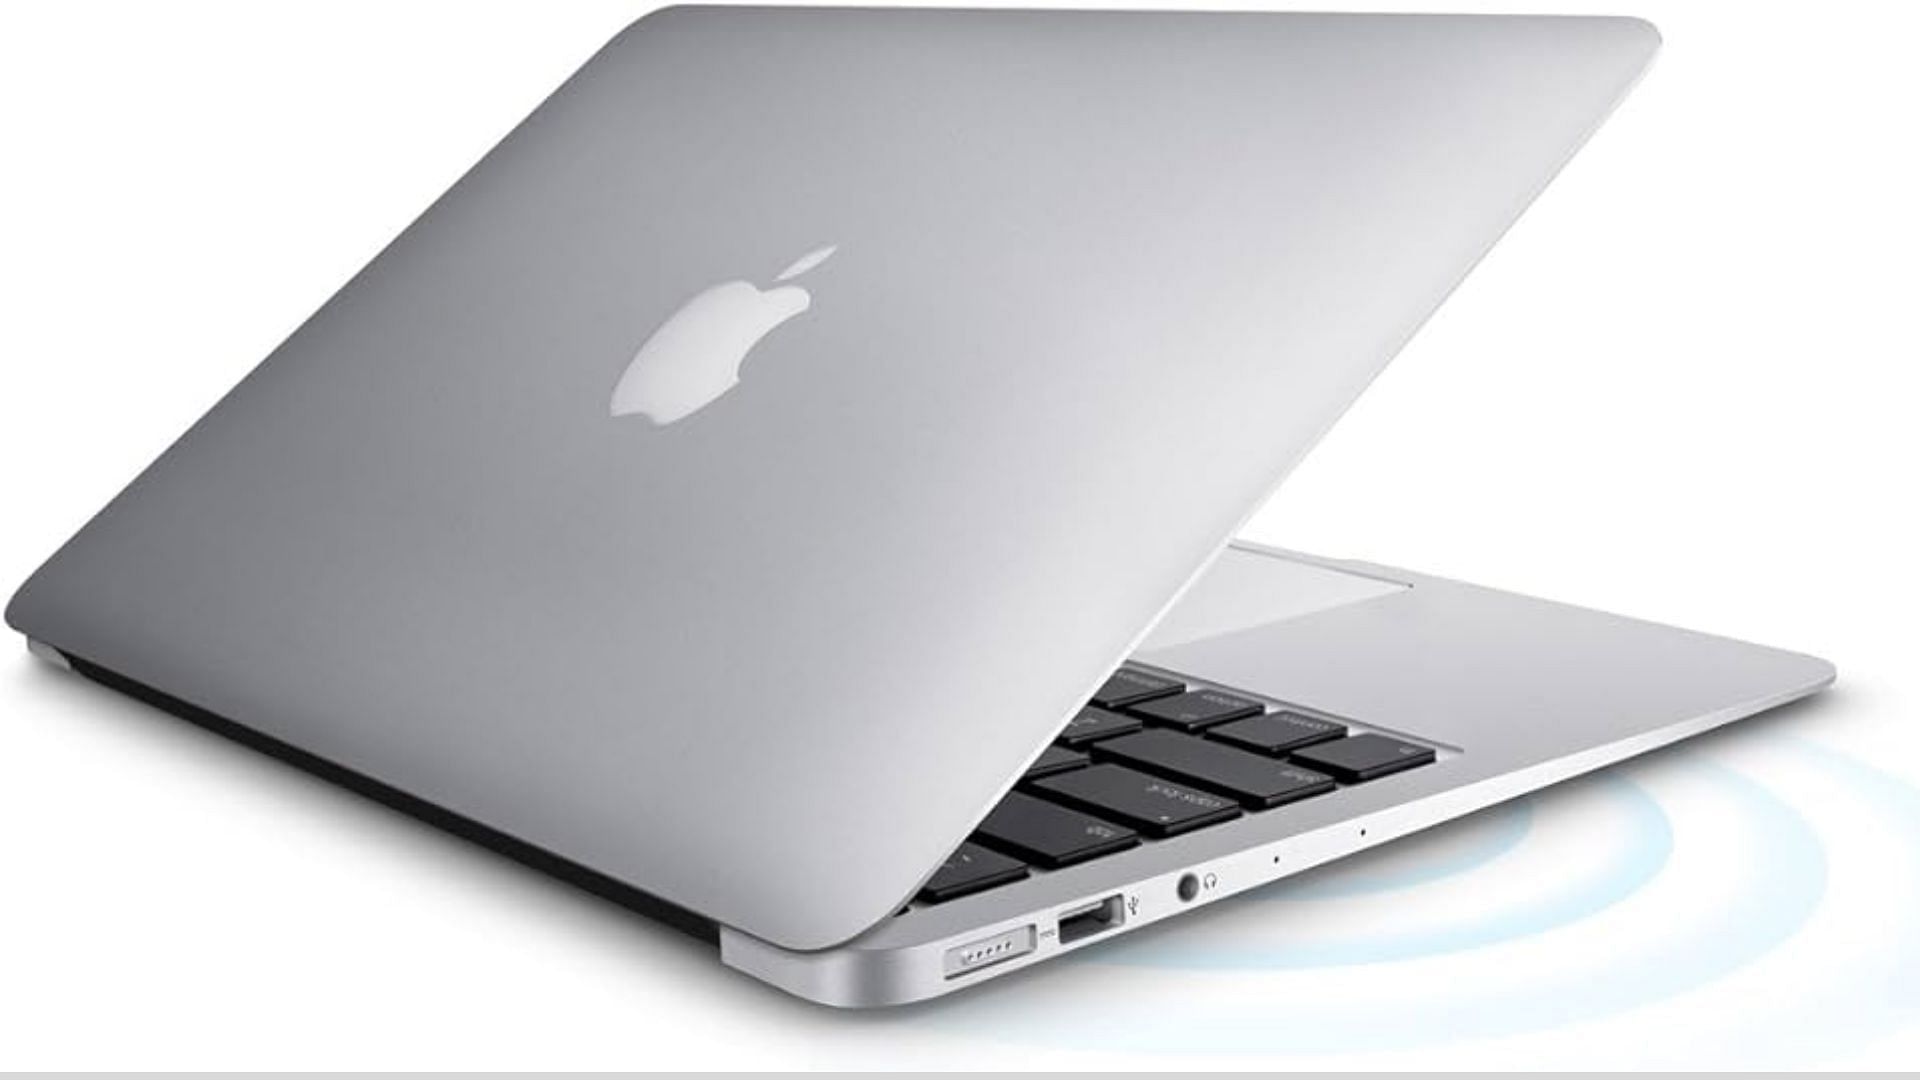 The new MacBook will be more powerful and efficient (Image via Amazon/Apple)